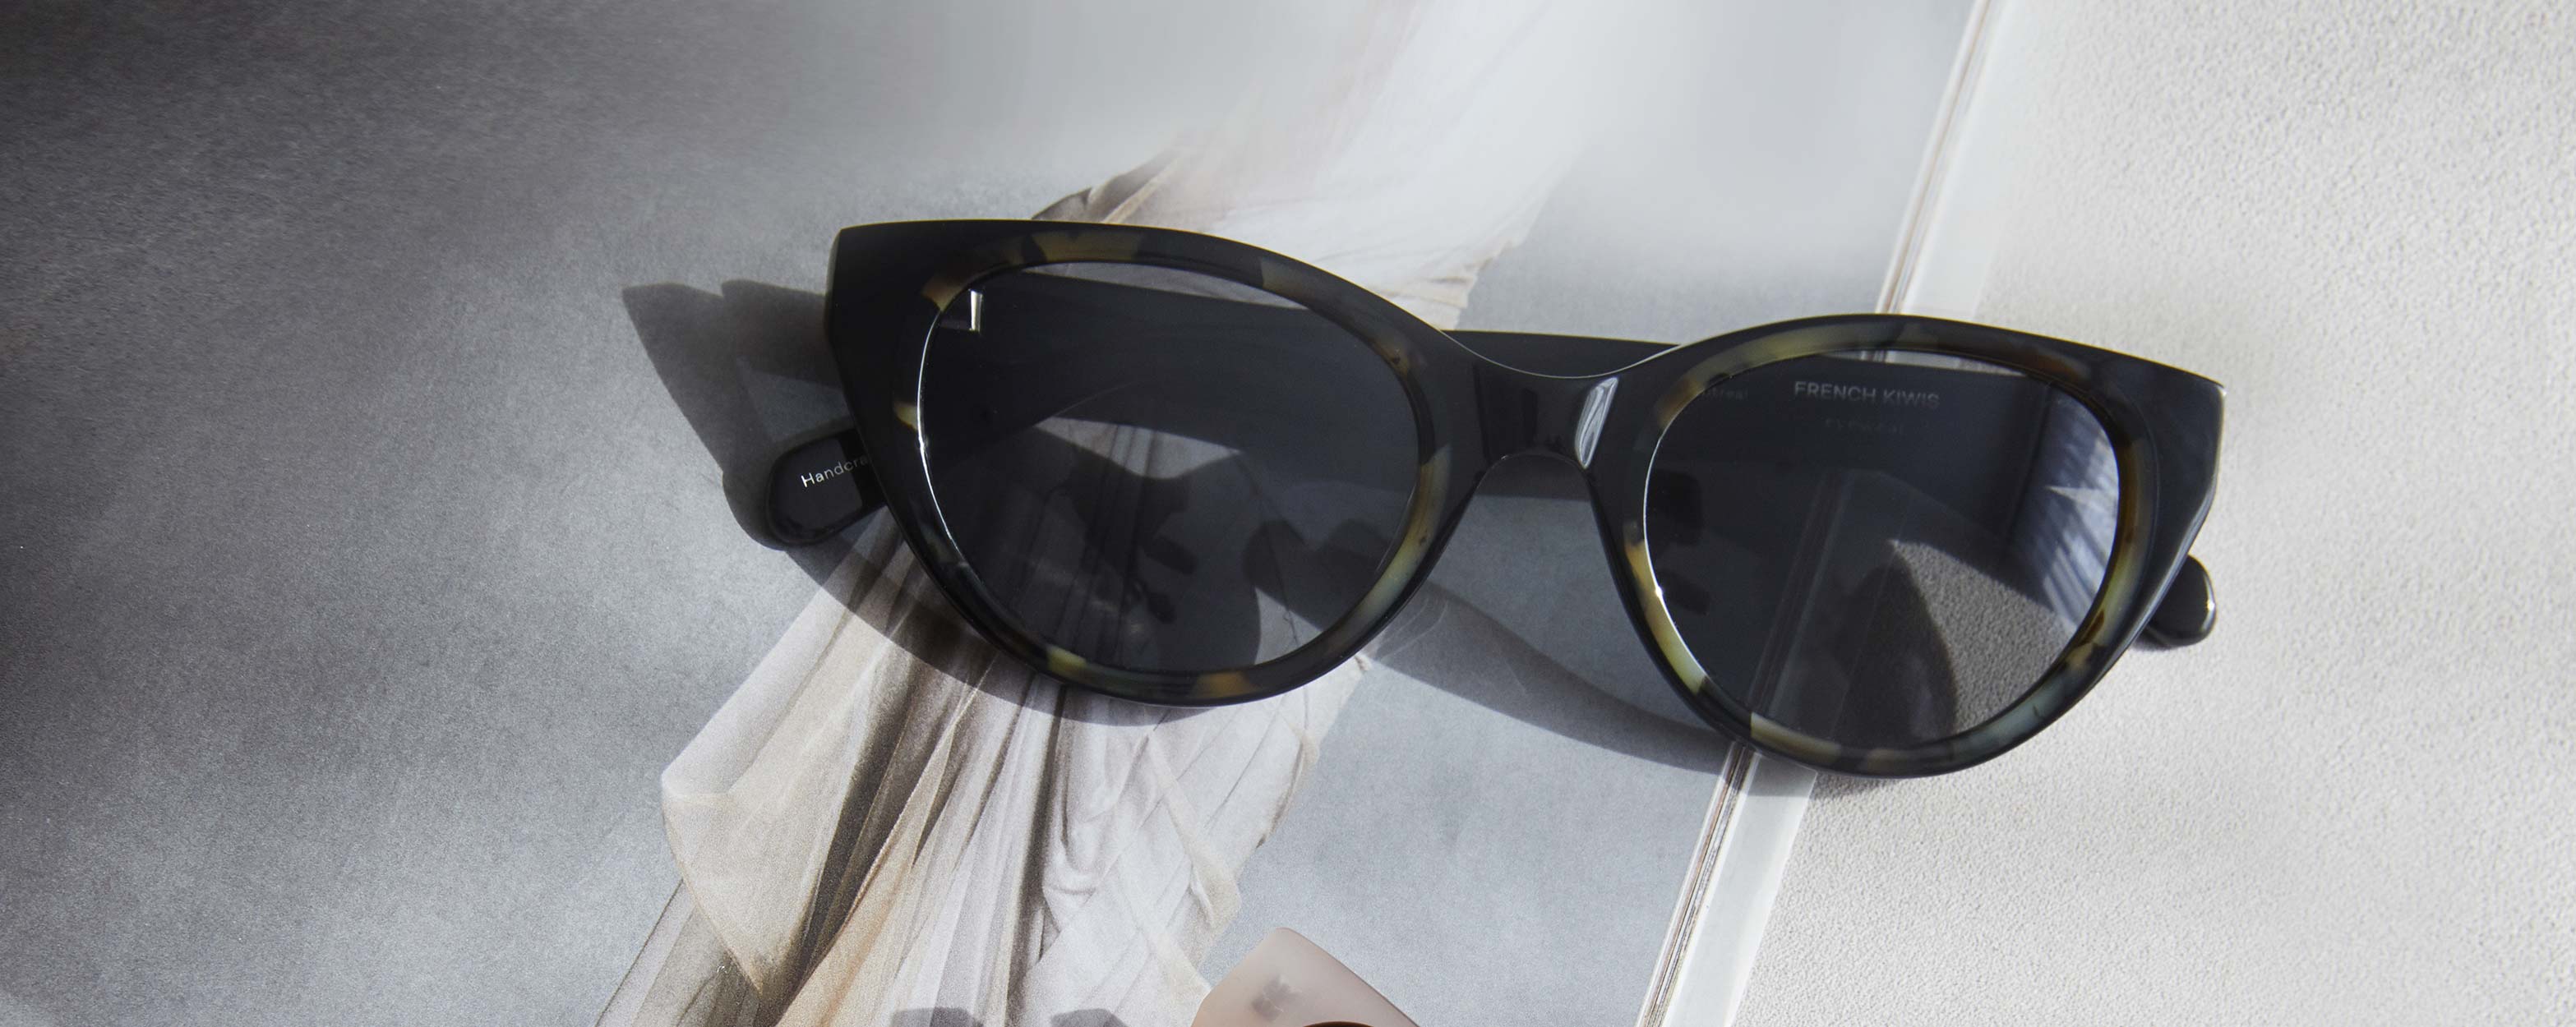 Photo Details of Colette Sun Tortoise & Brown Sun Glasses in a room